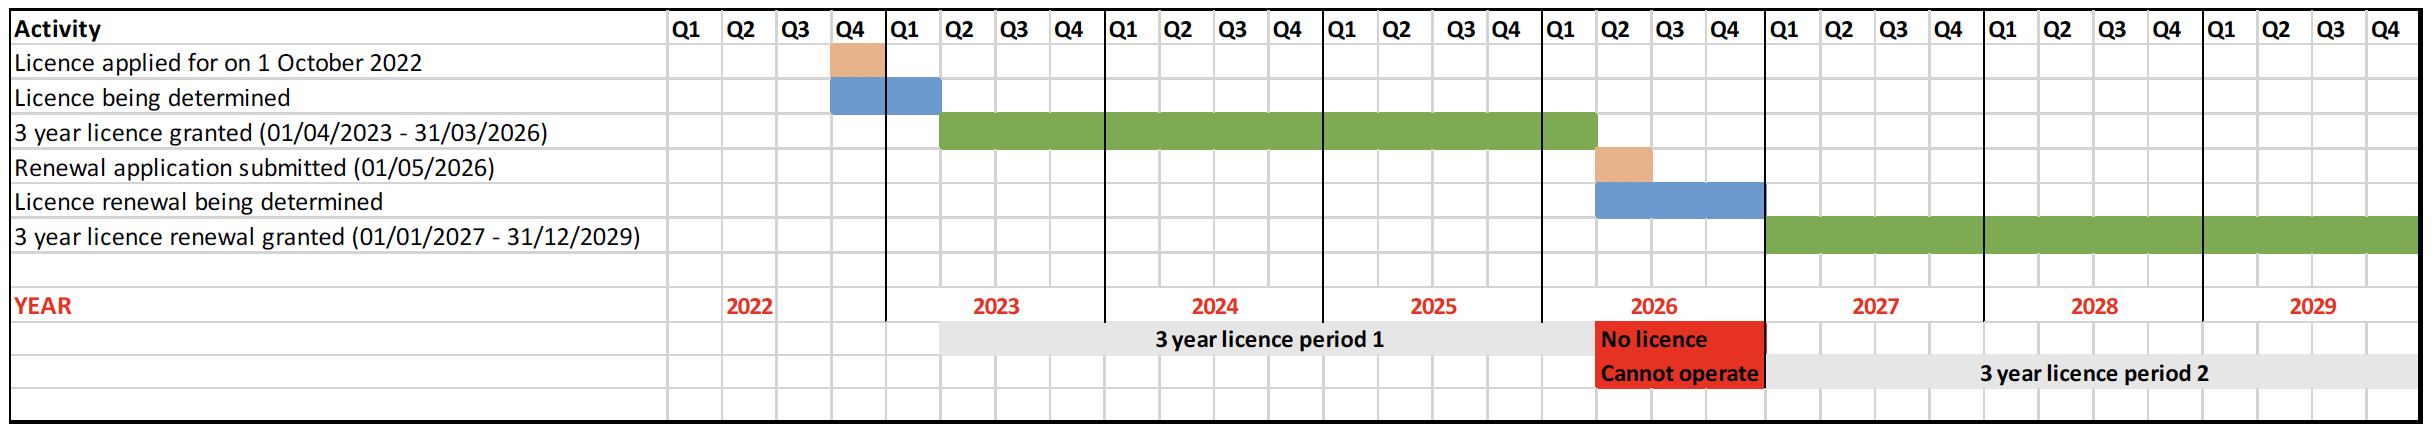 Gantt chart illustrating the process for renewing a licence where the application for renewal is made after the expiry of the original licence.  In this case, the application is treated as a new application, rather than a renewal application.